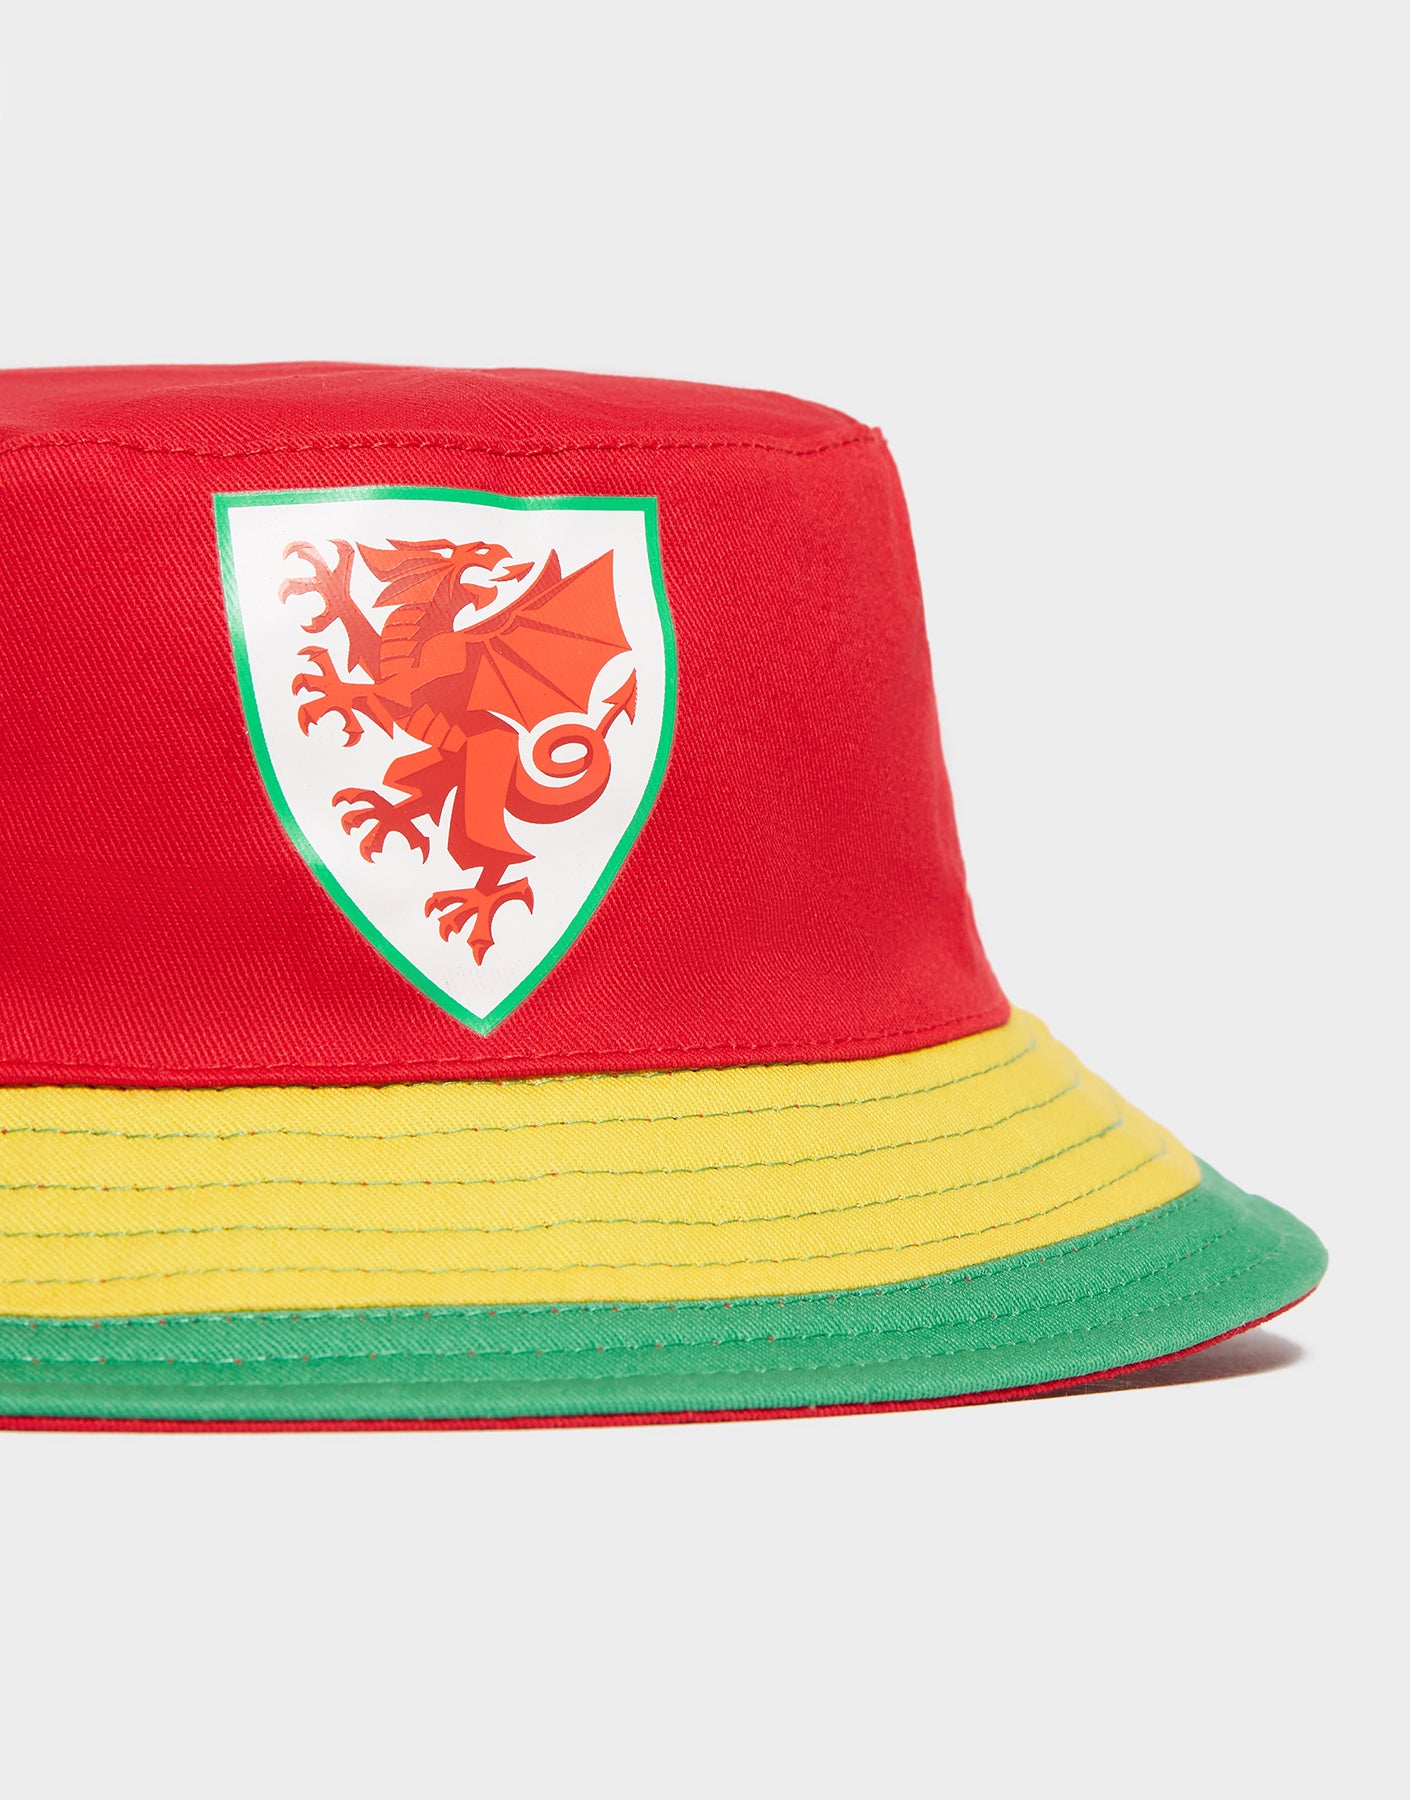 Official Team Wales Reversible Bucket Hat - The World Football Store